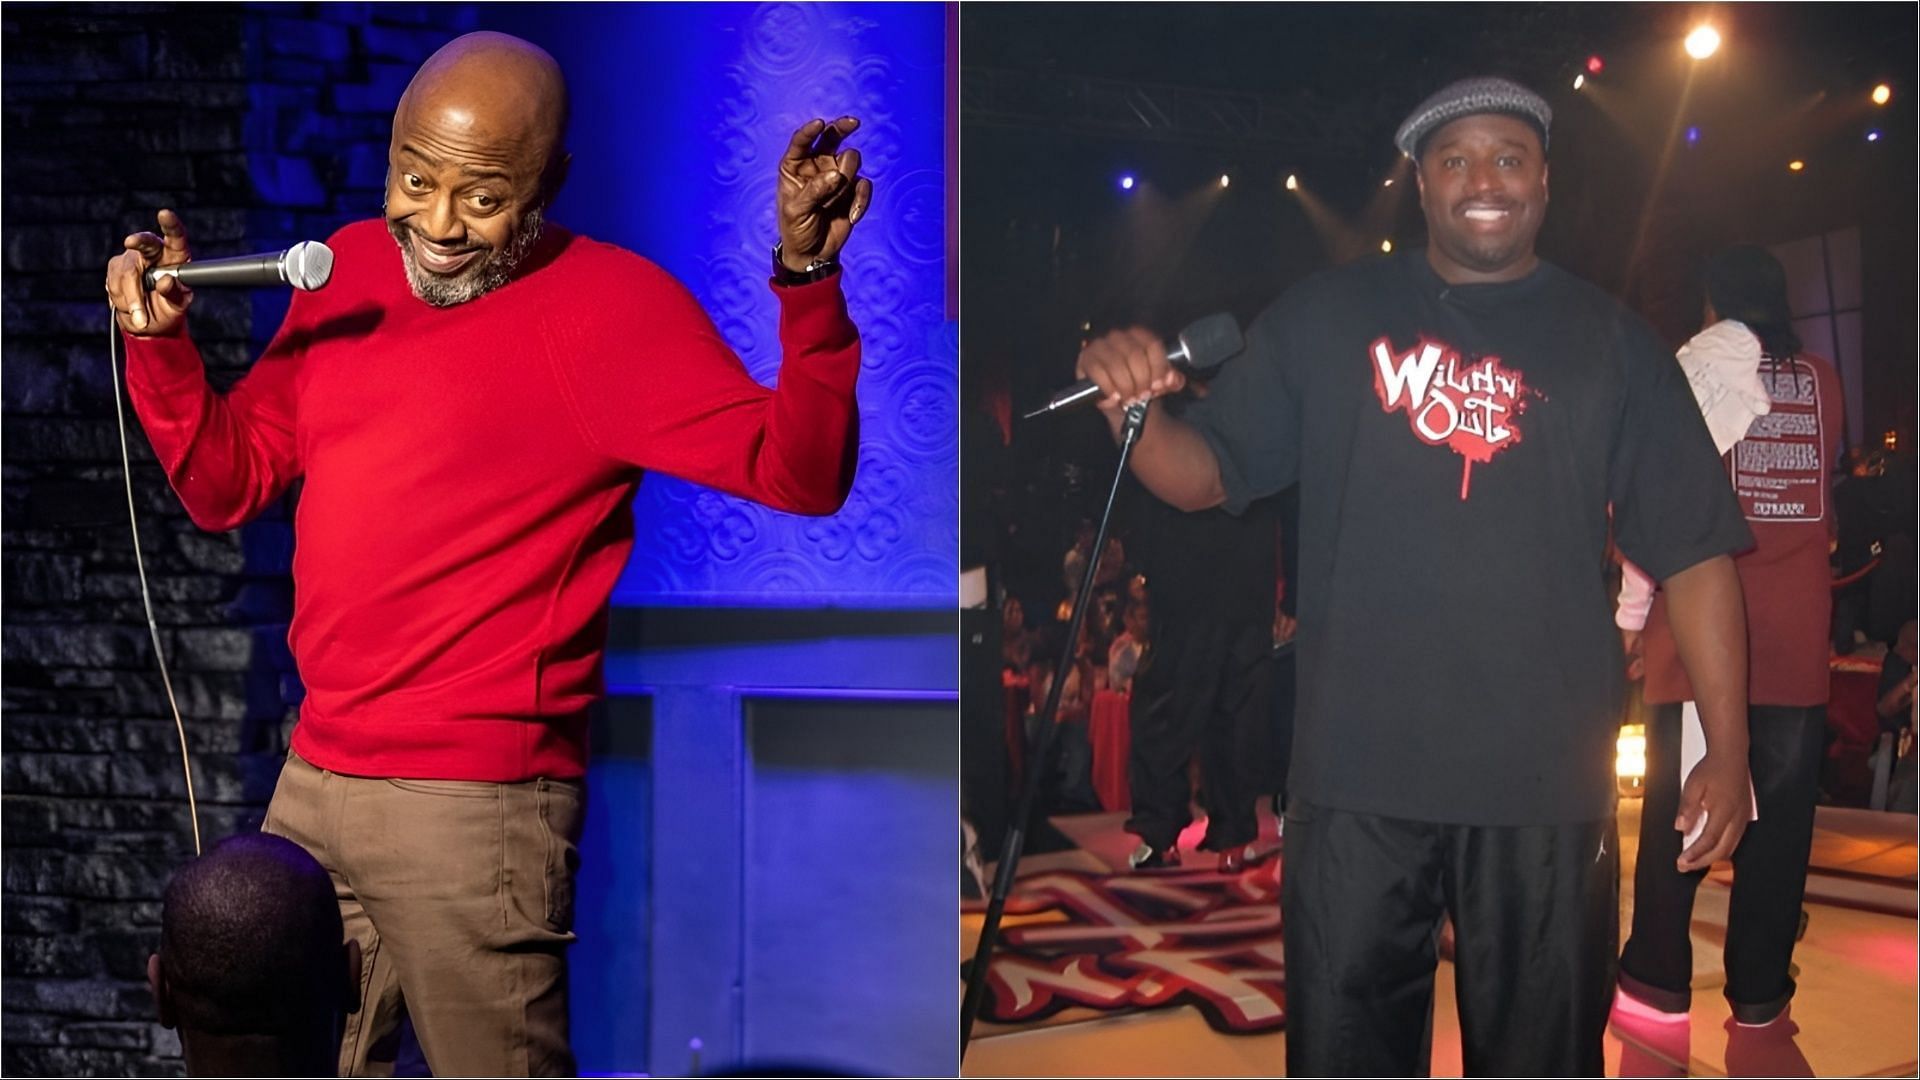 Donnell Rawlings was spotted yelling at Corey Holcomb when the latter made some inappropriate comments (Images via donnellrawlings/Instagram and Corey Holcomb/Facebook)